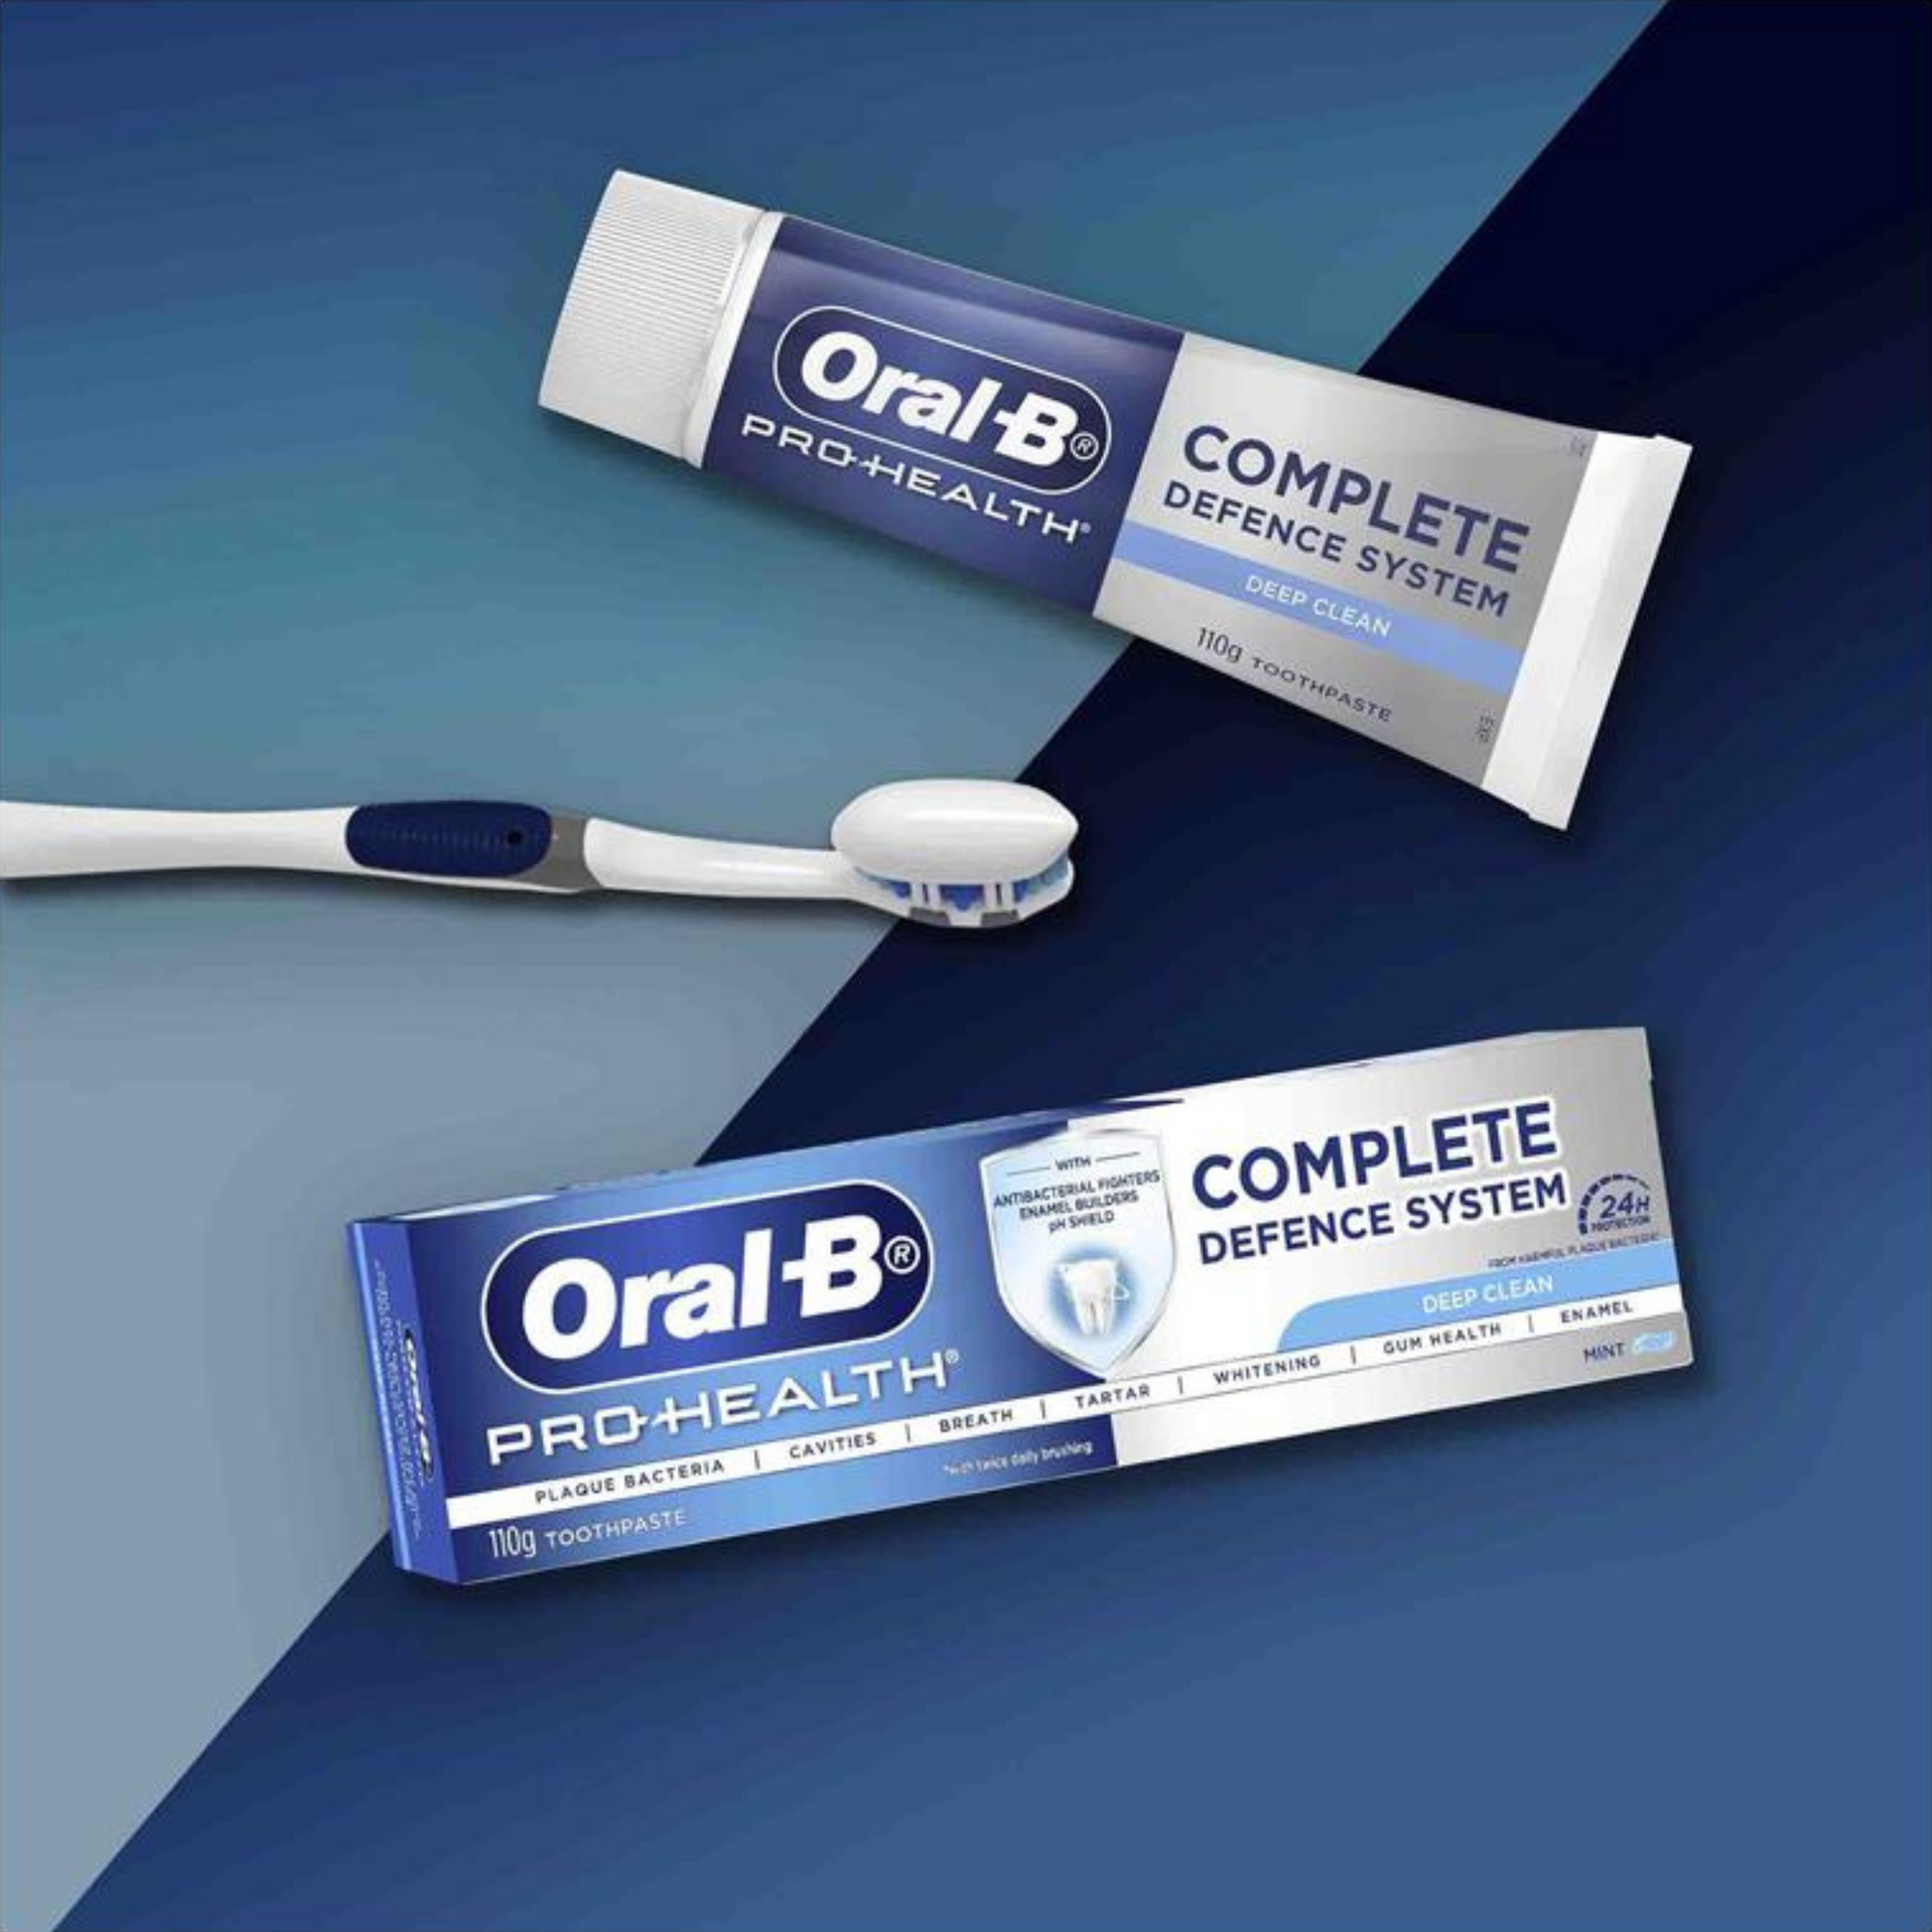 Oral B Pro Health Complete Defence System Deep Clean is a fluoride toothpaste with antibacterial fighters, enamel builders & pH shield. Regular use promotes healthy gums, strong teeth & protects enamel. Best genuine imported foreign Australian premium real quality dental health toothpaste price in Dhaka Bangladesh.